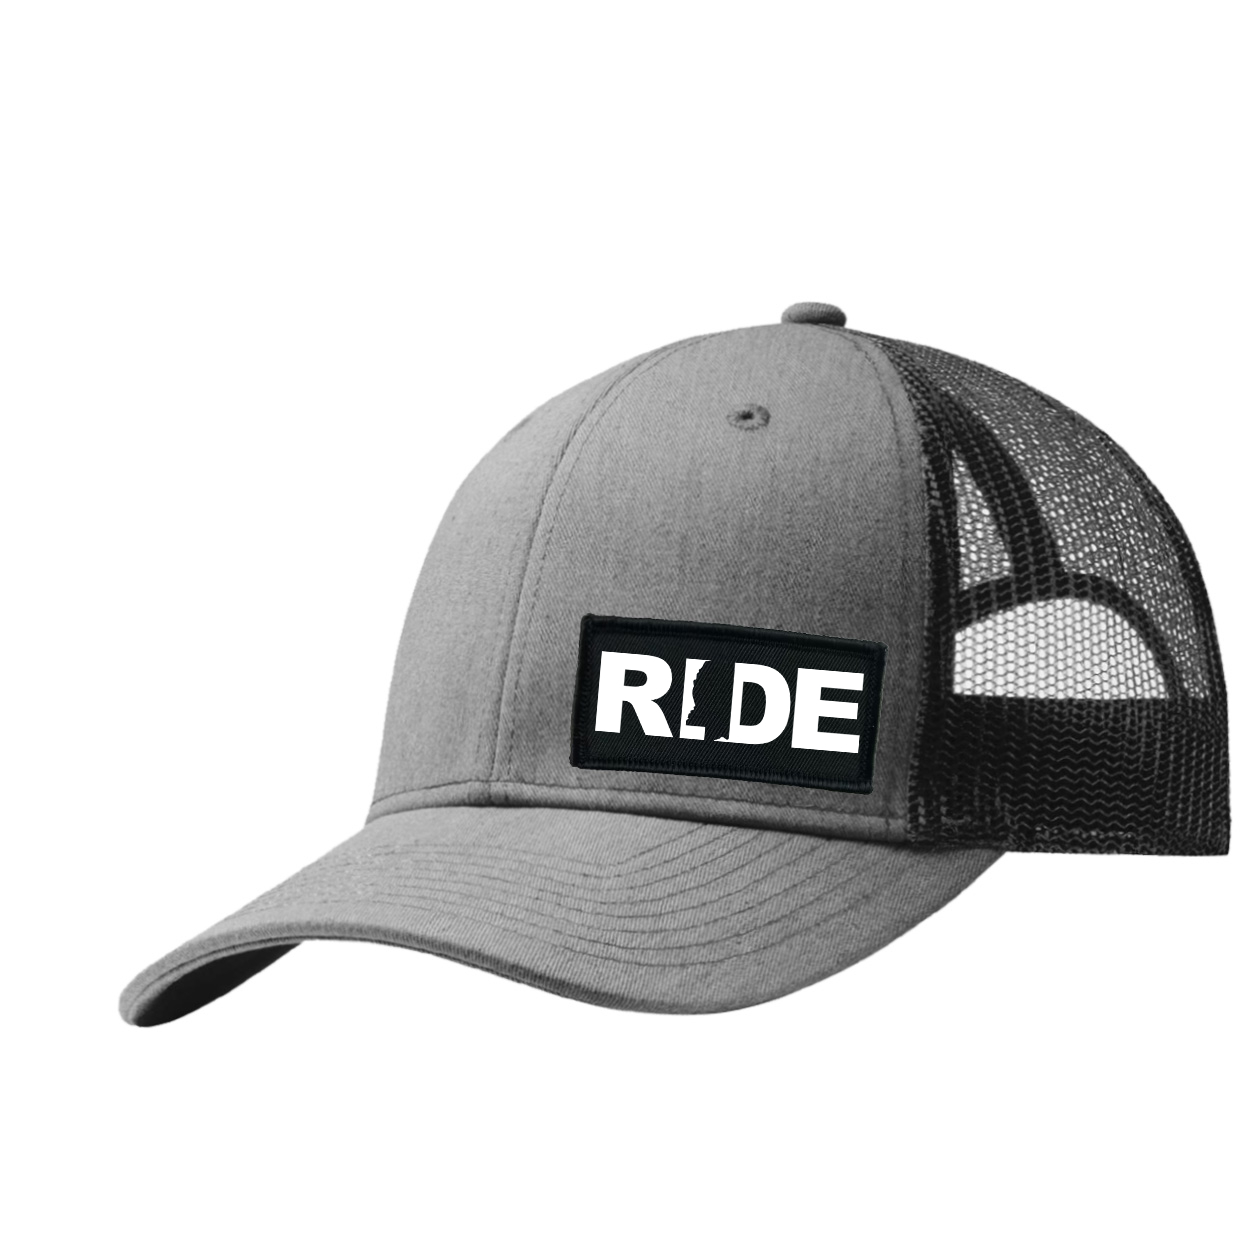 Ride Mississippi Night Out Woven Patch Snapback Trucker Hat Heather Gray/Black (White Logo)